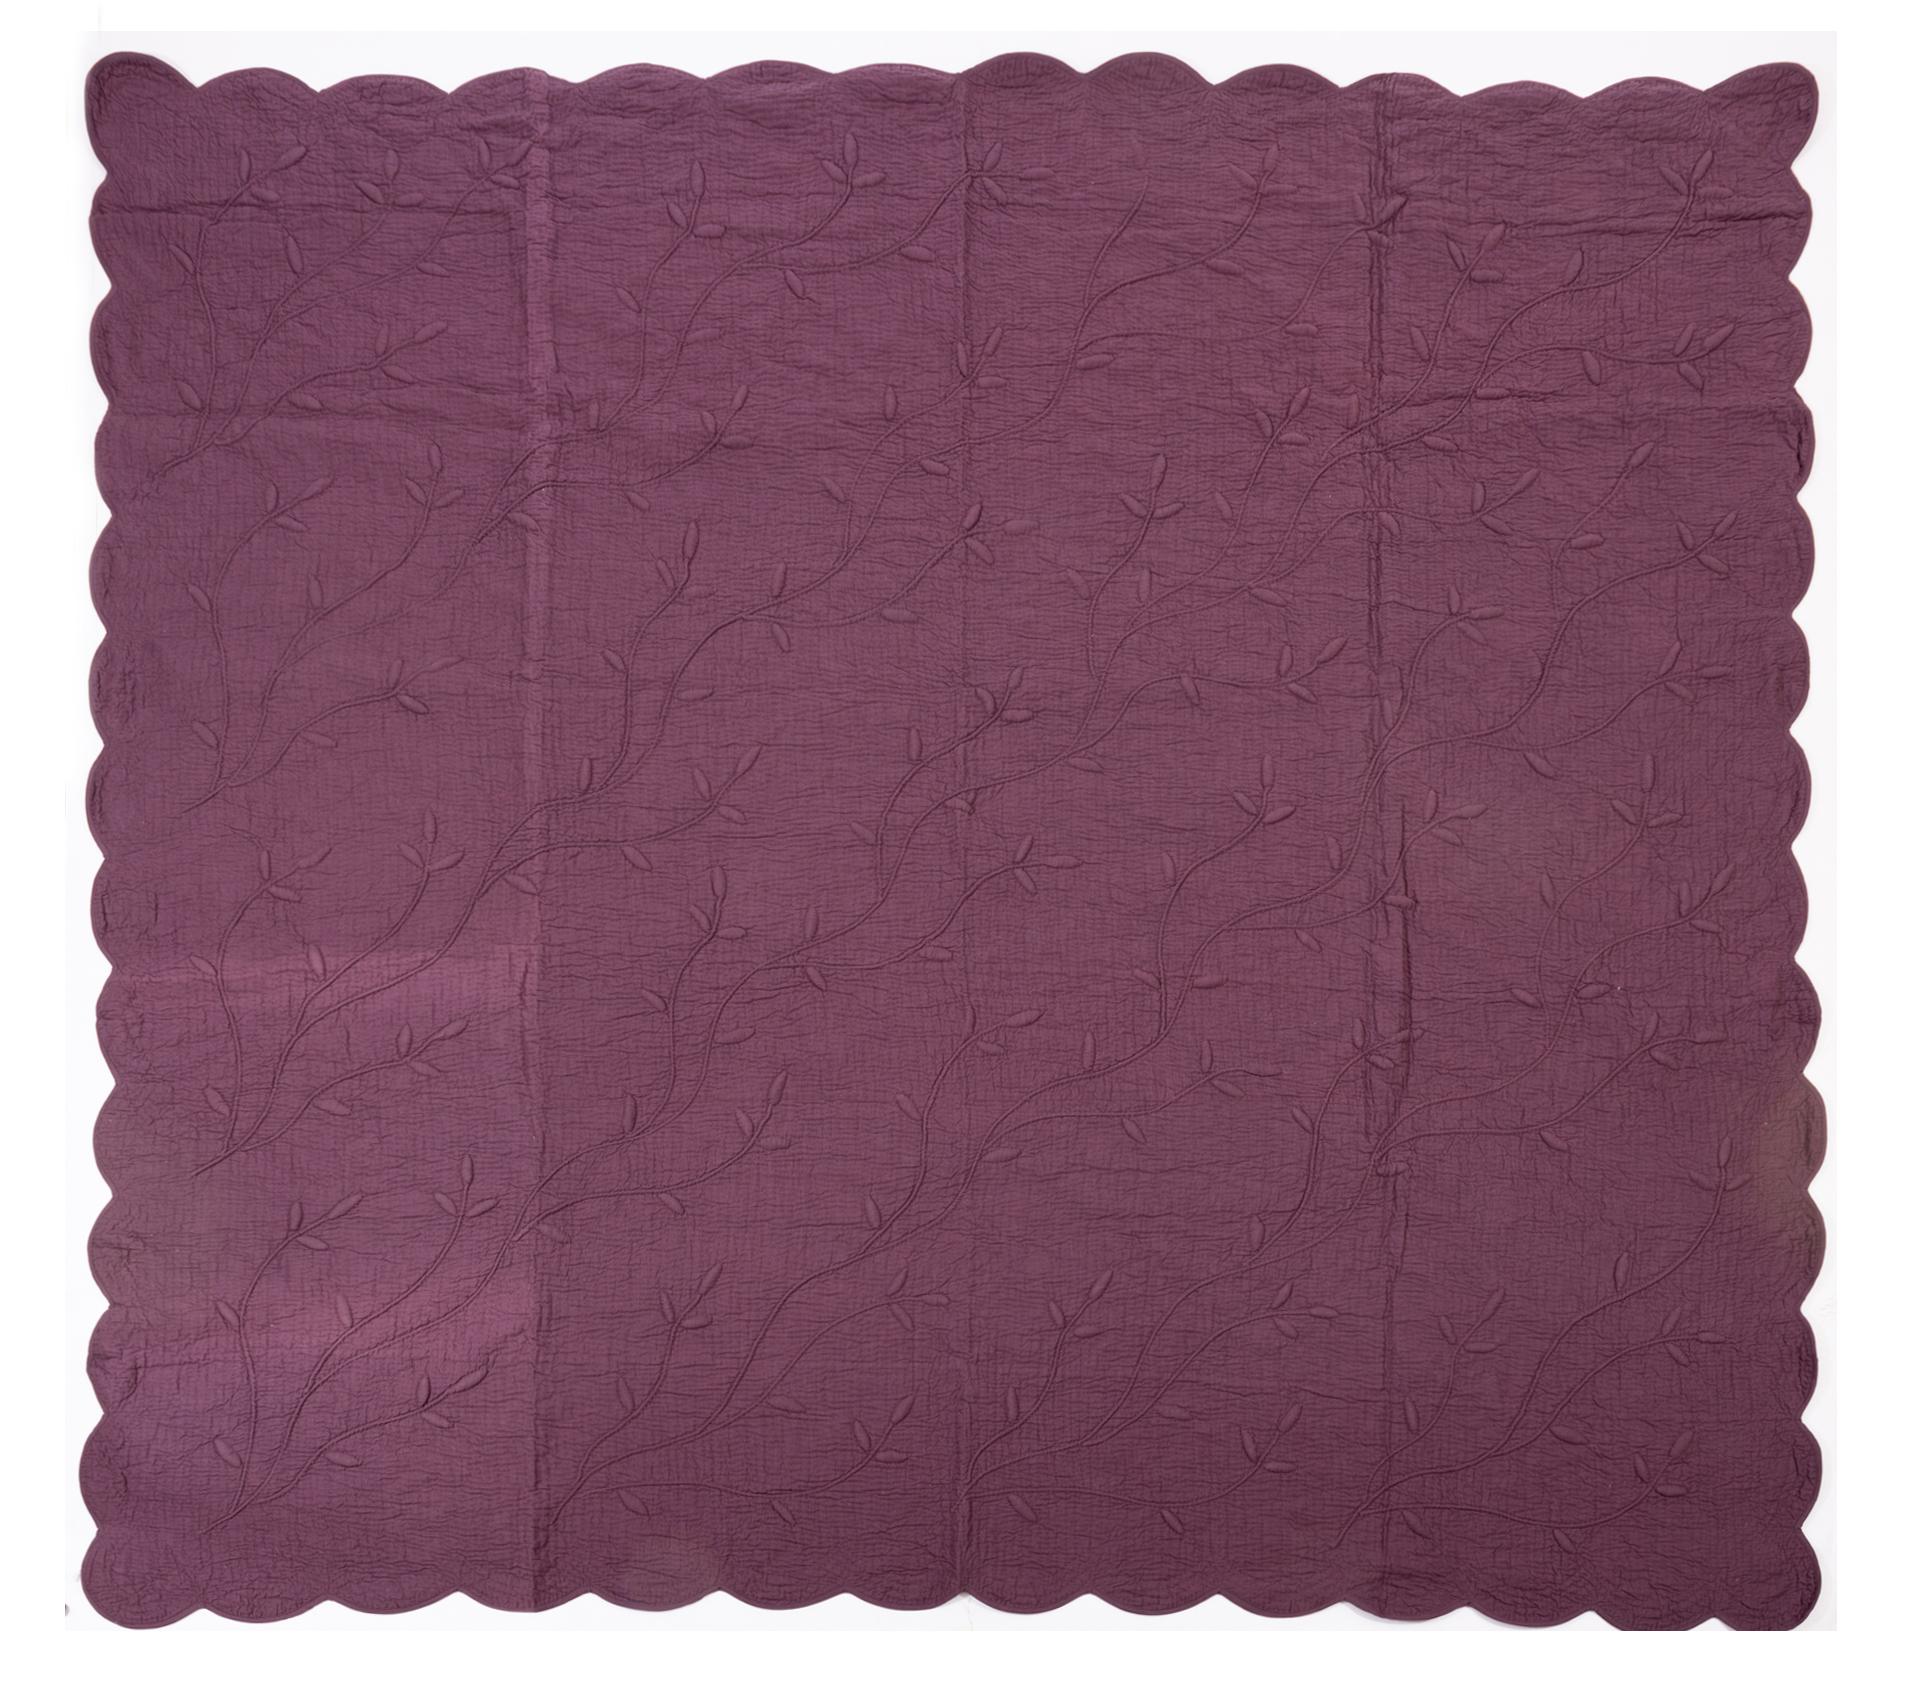 B/2012 -  Quilted cotton for this bedspread in violet colour by Vivaraise in France. 
Tactile materiality, softness and craftsmanship give the home the sense and pleasure of what is handmade.
It's new, never used.